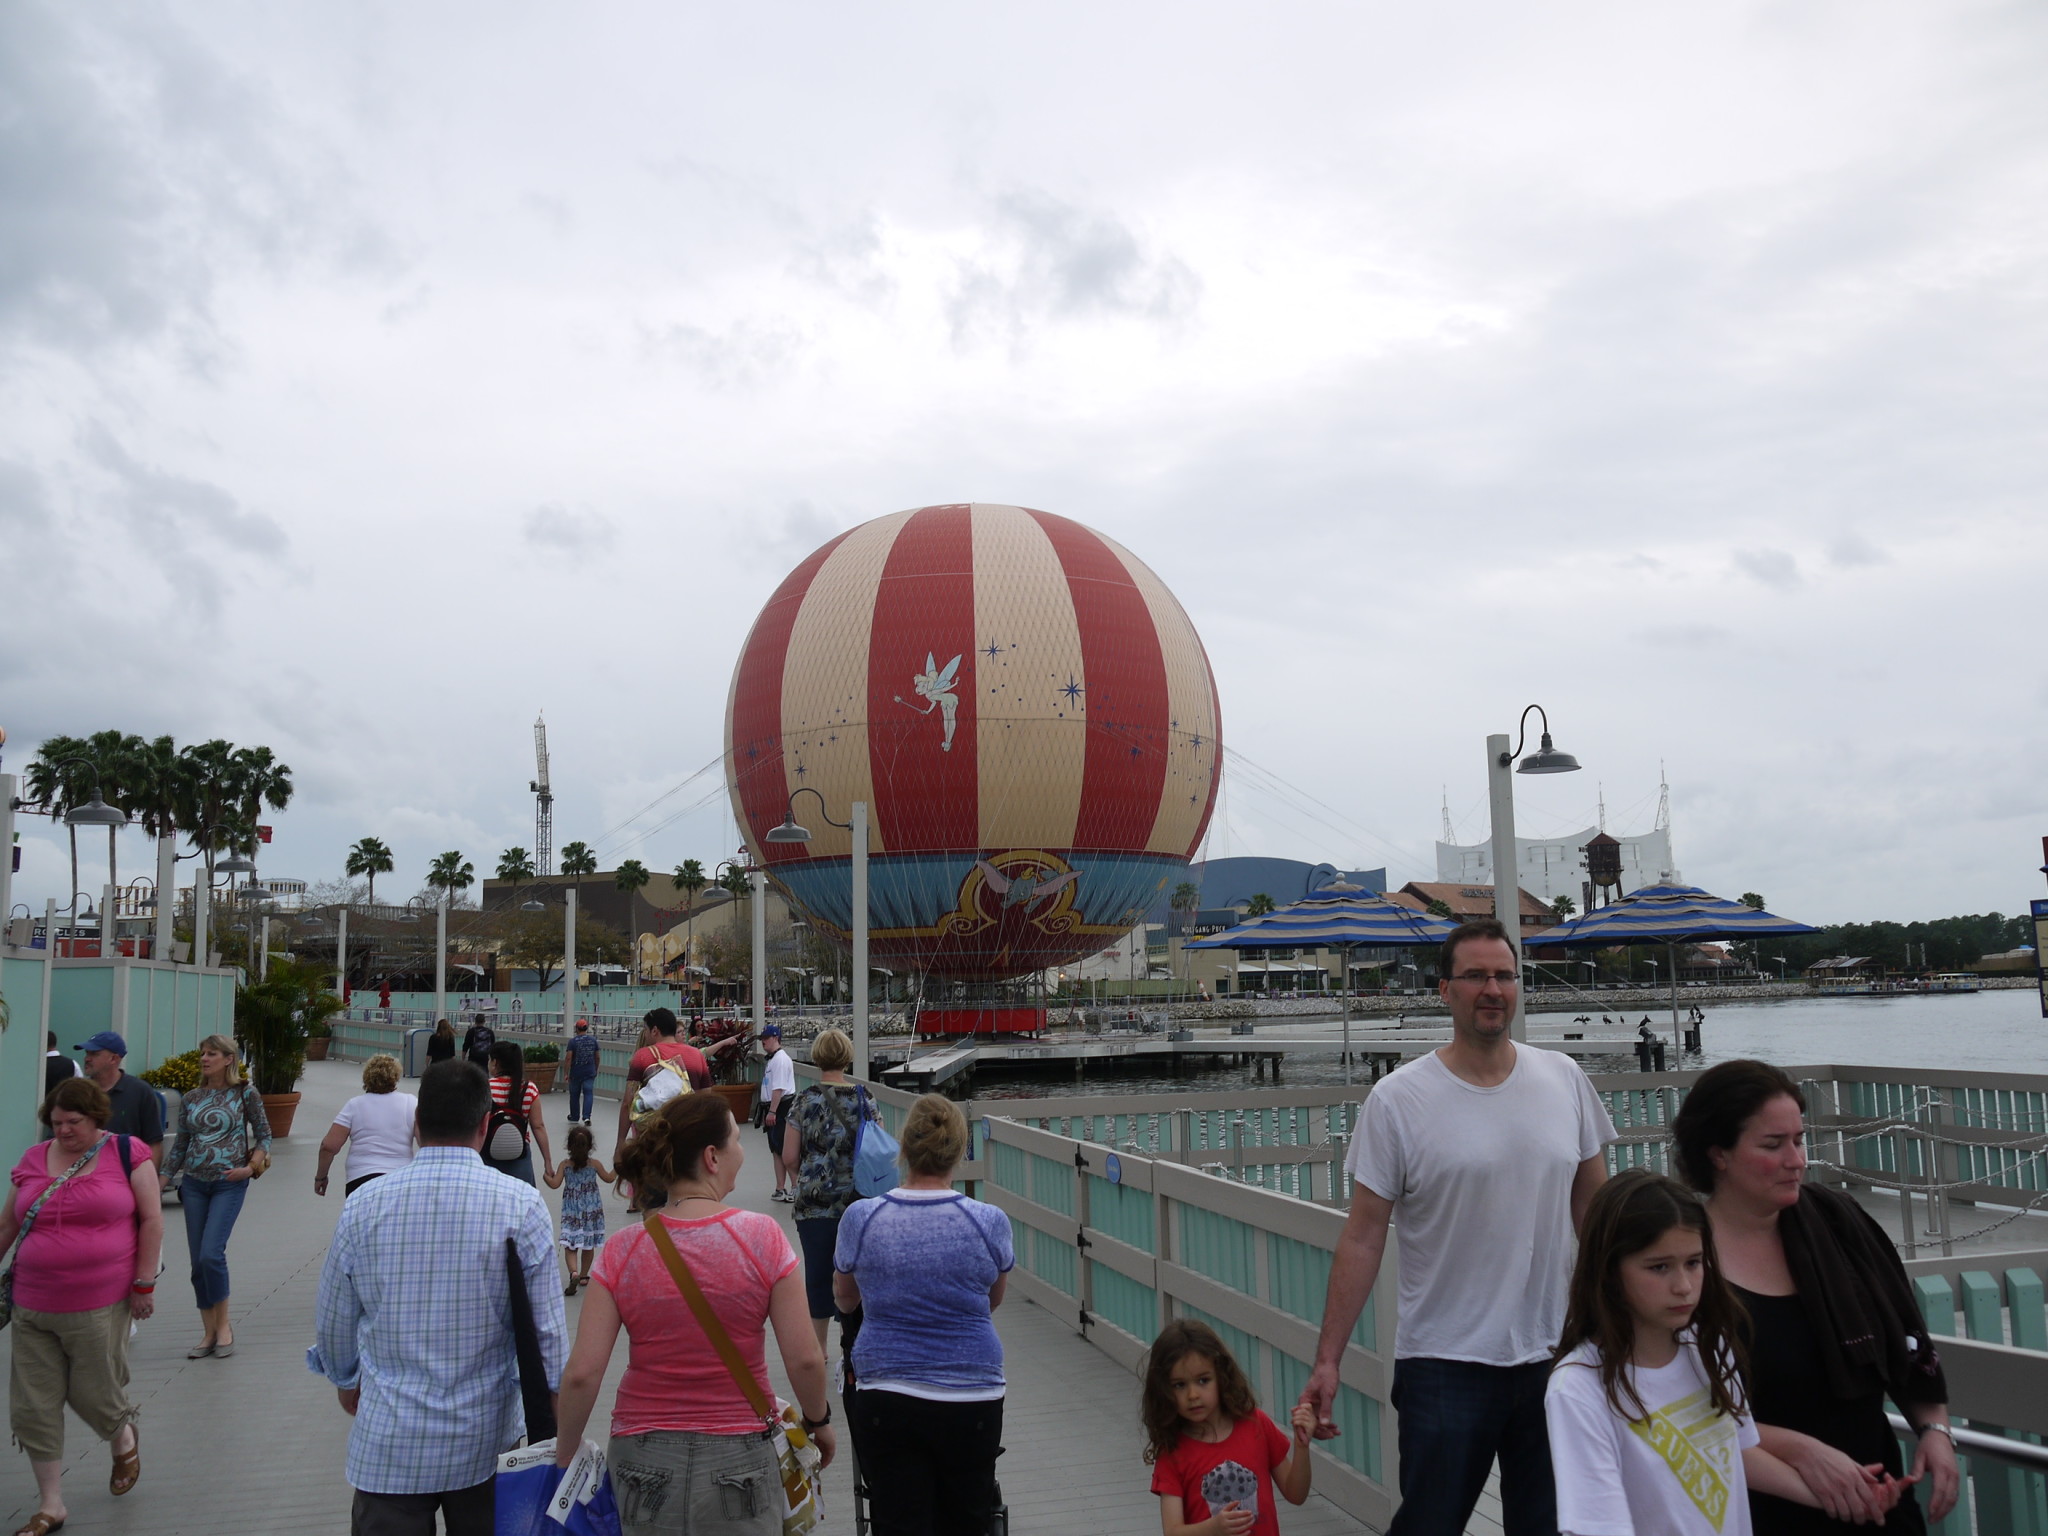 Disney World Closures & Refurbishments for March 2014 and Beyond